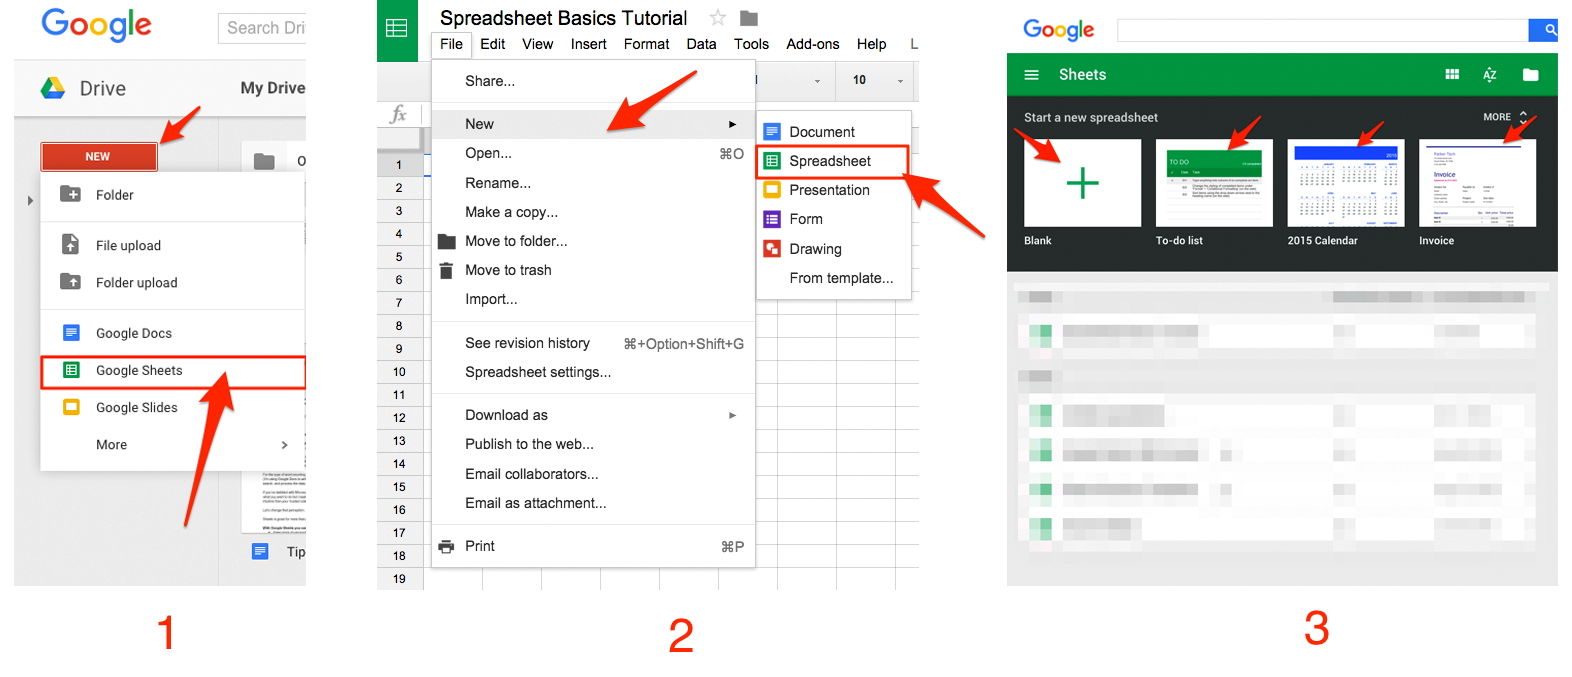 How To Make A Spreadsheet On Google For Google Sheets 101: The Beginner's Guide To Online Spreadsheets  The